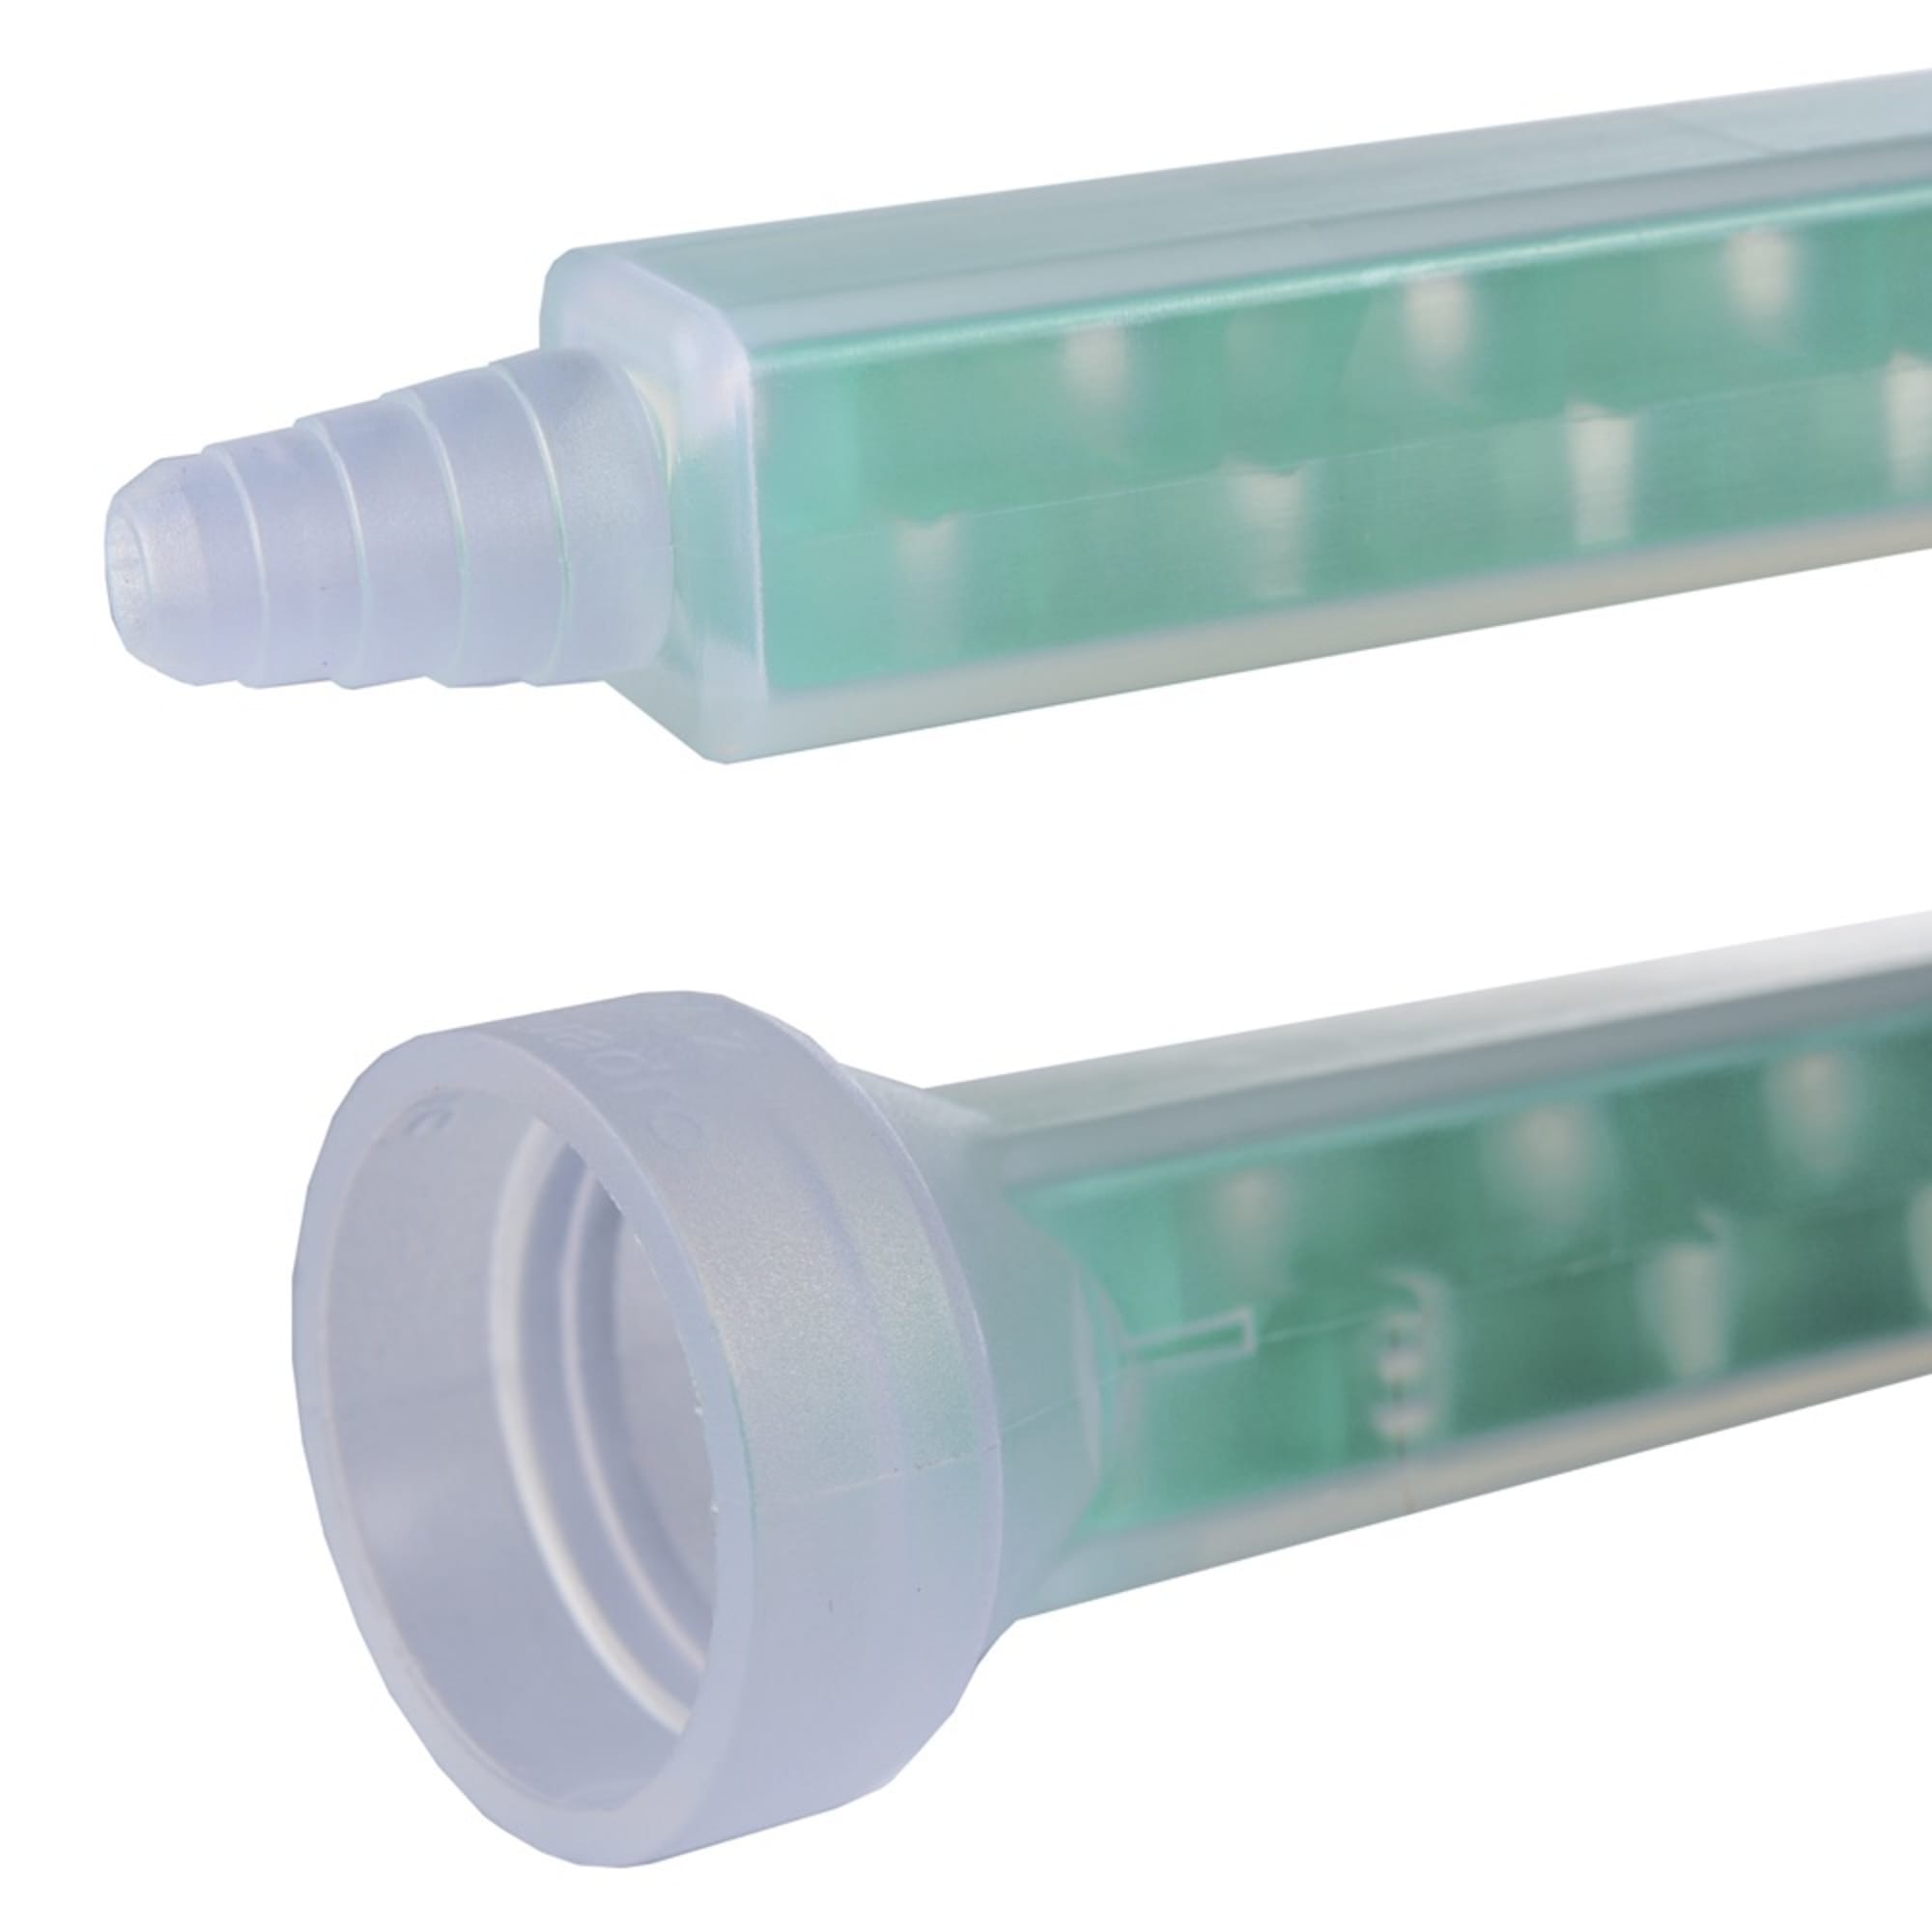 Mixing tube for MD double cartridges 400 g (MR 1:1 ), image 2